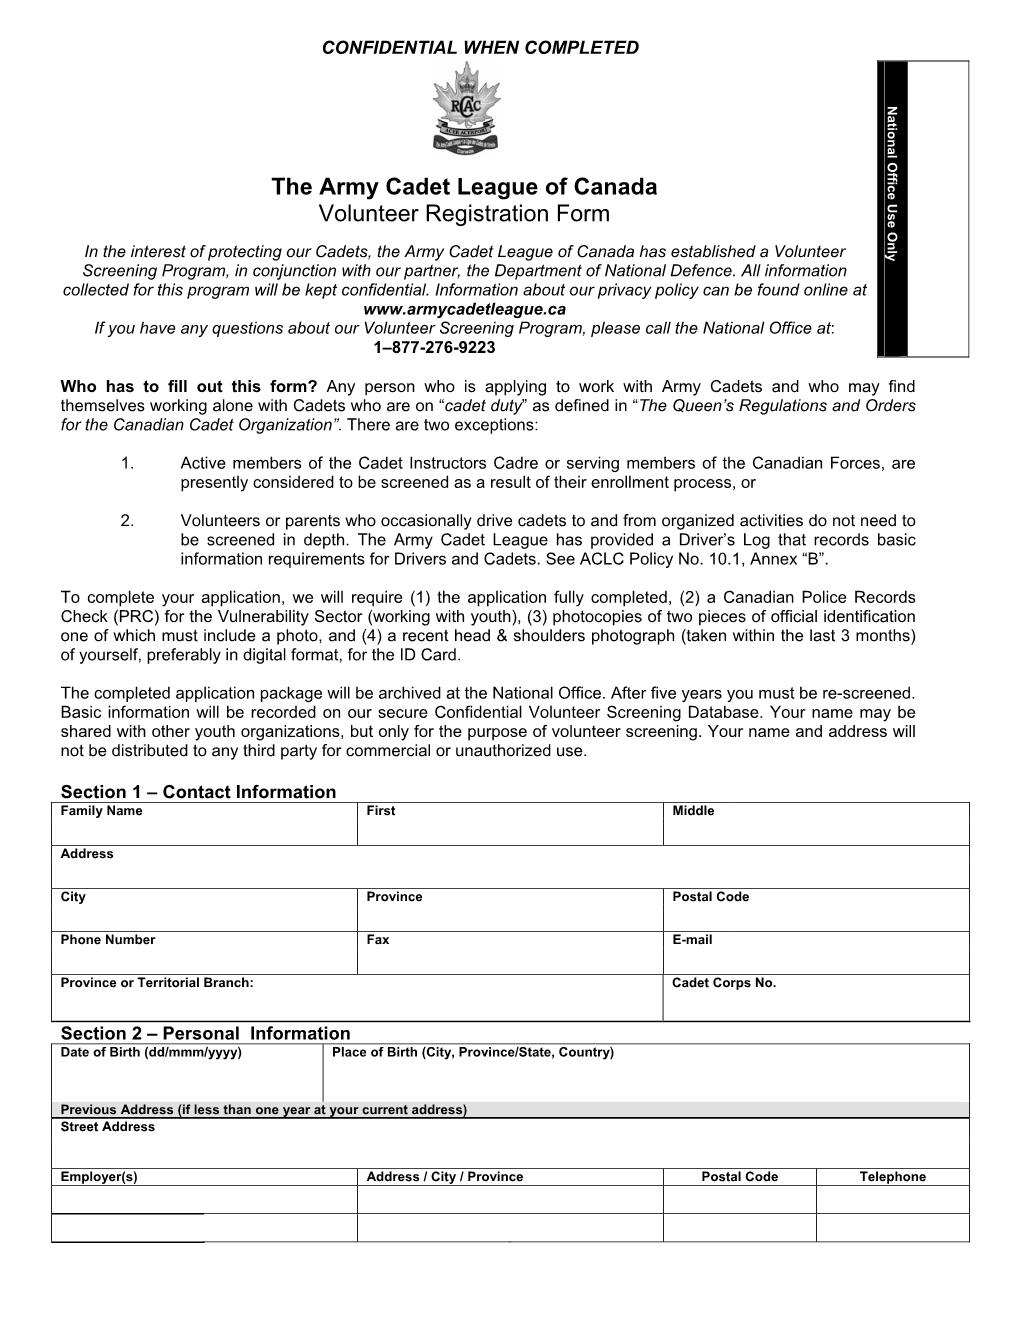 The Army Cadet League of Canada Volunteer Registration Form